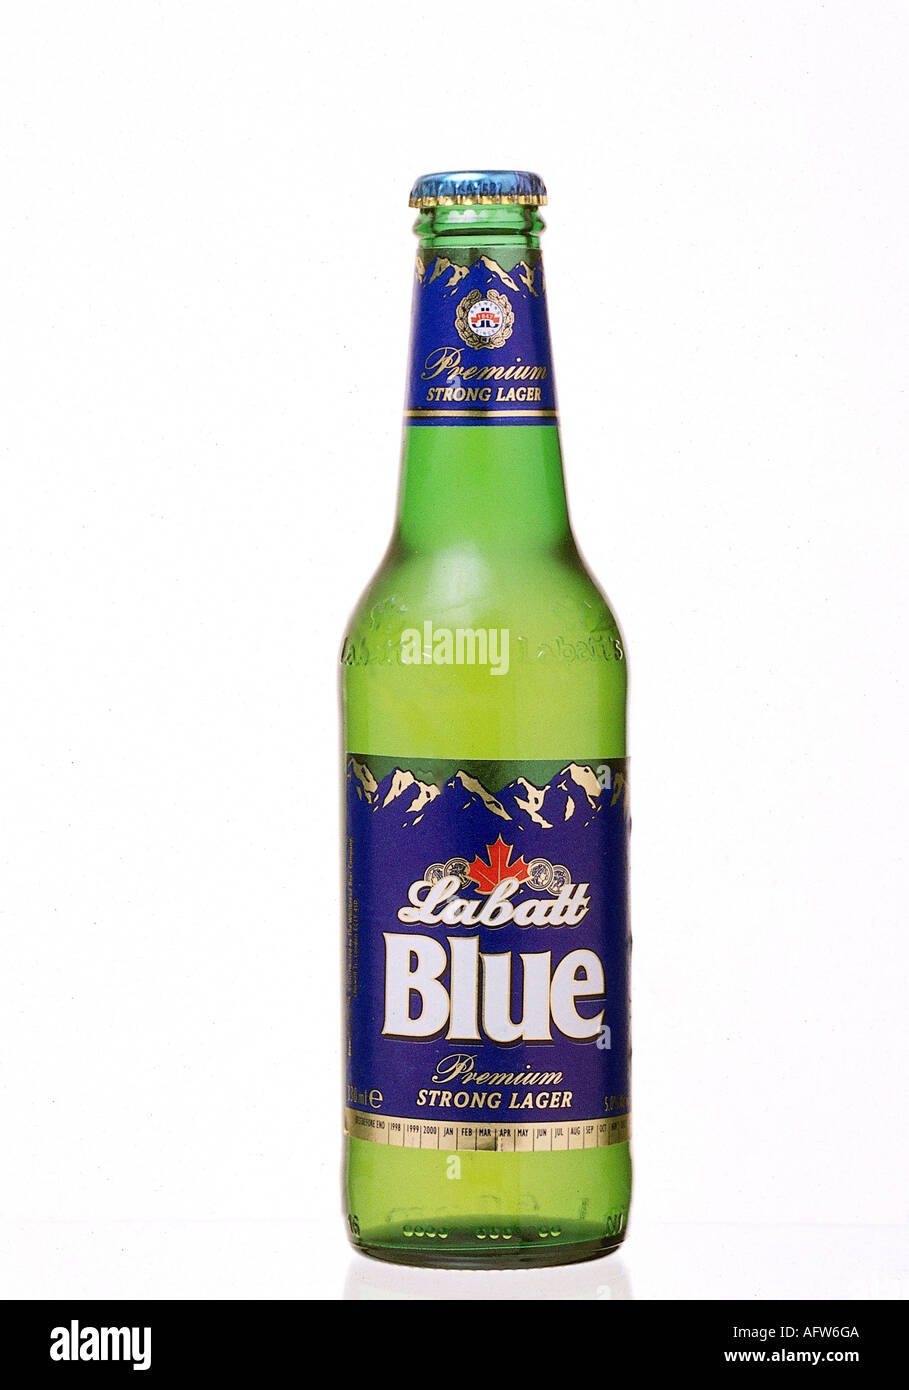 food and beverages, alcohol, beer, bottle "Labatt Blue Premium Strong Lager", Labatt Brewing Company, Canada, bottles, Additional-Rights-Clearance-Info-Not-Available Stock Photo